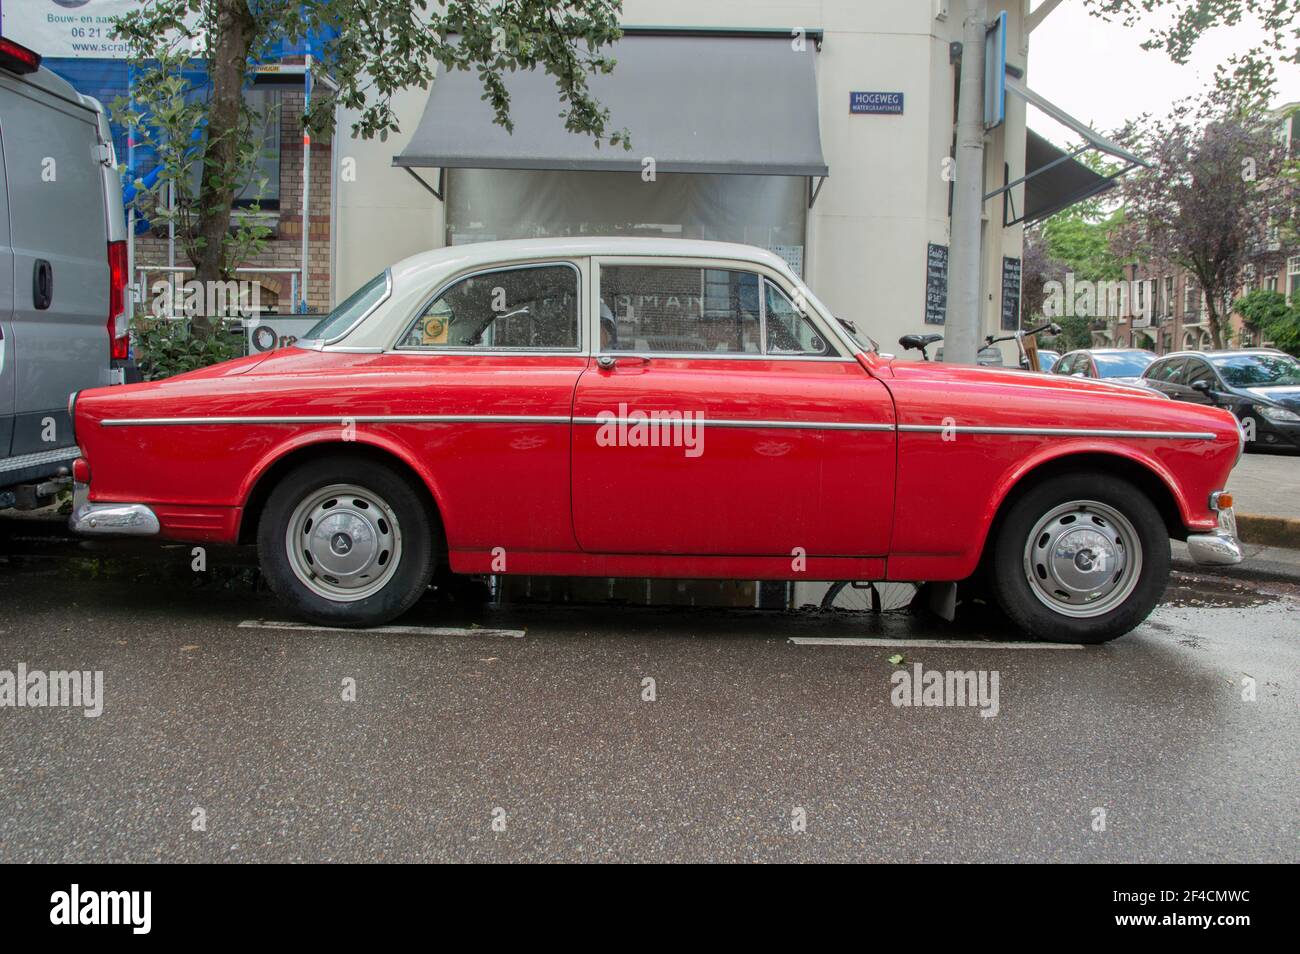 Vintage Volvo High Resolution Stock Photography and Images - Alamy